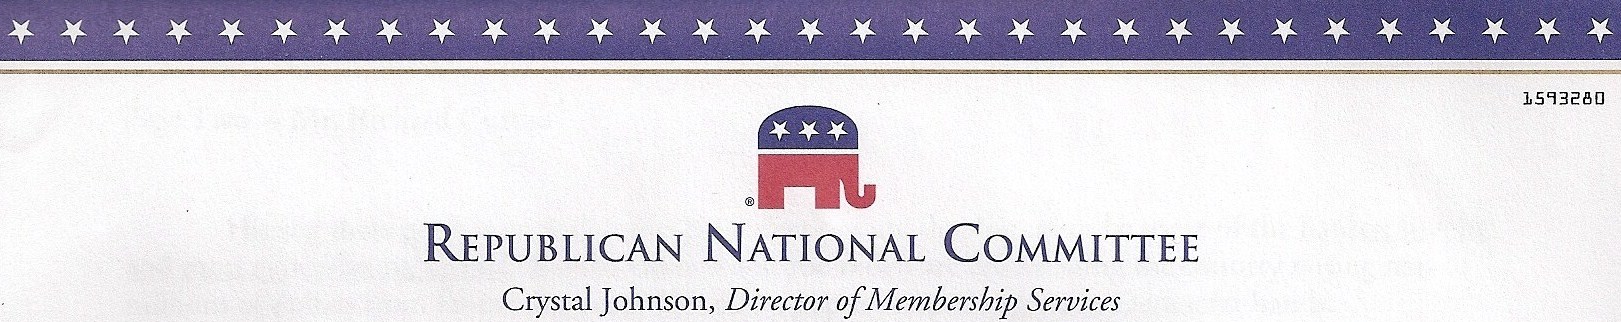 Republican National Committee letterhead